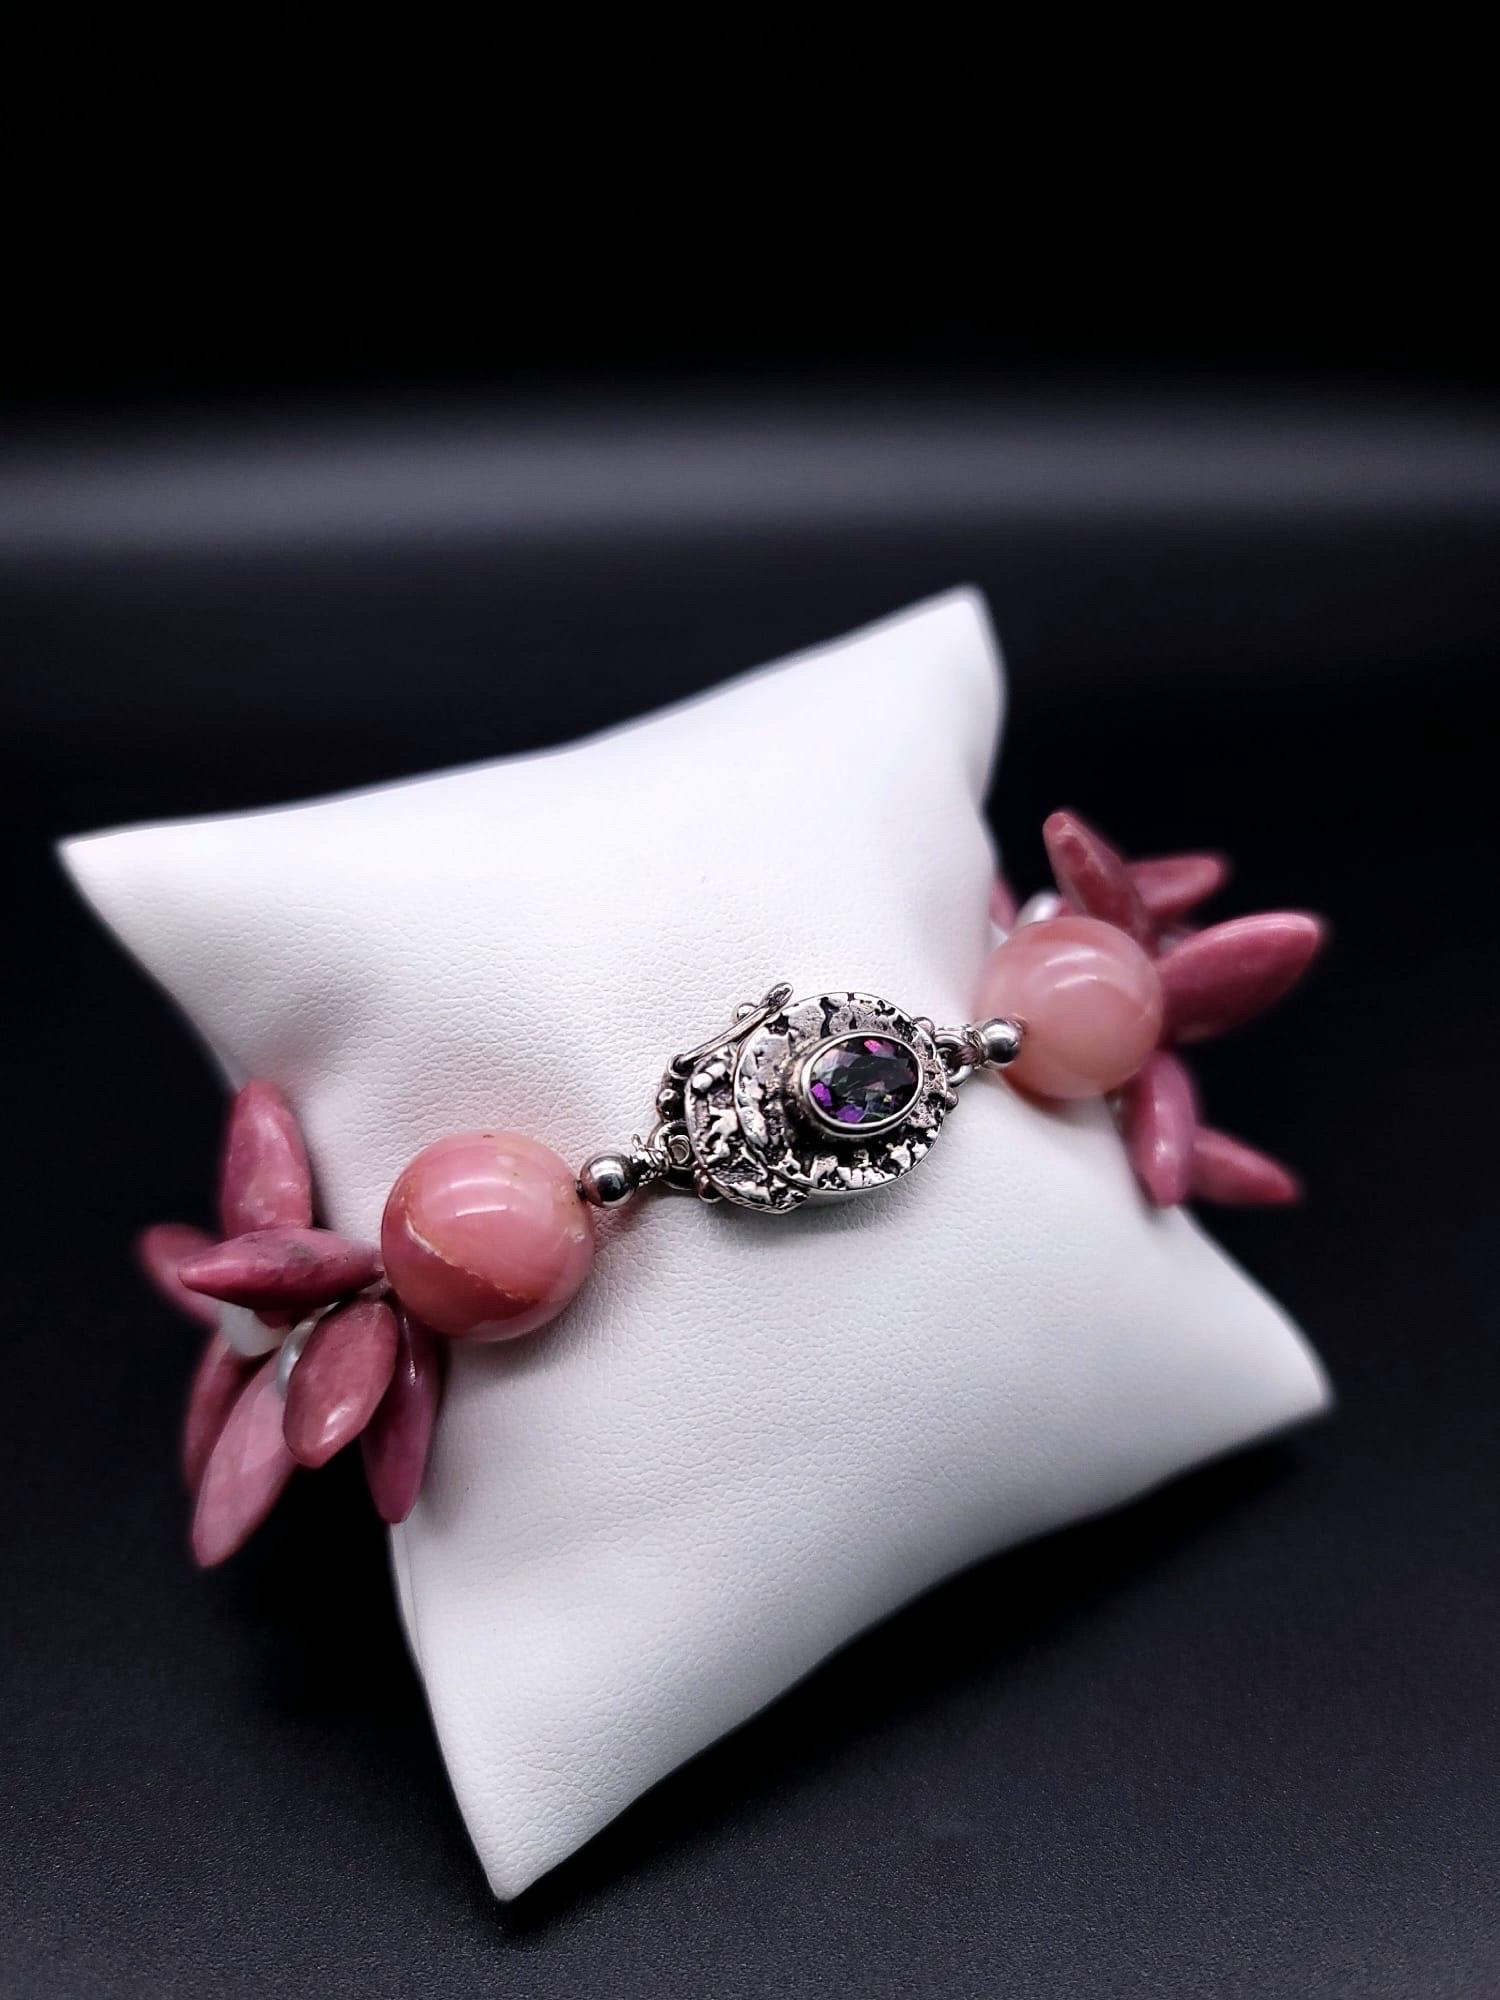 One-of-a-Kind

If you are a bracelet collector this is a must-have. Pink faceted Rhodochrosite petals accented with 5mm pearls join to make a wrist ruffle caught up with an elegant sterling silver and tourmaline clasp.
Silk hand-knotted
Approx: 8